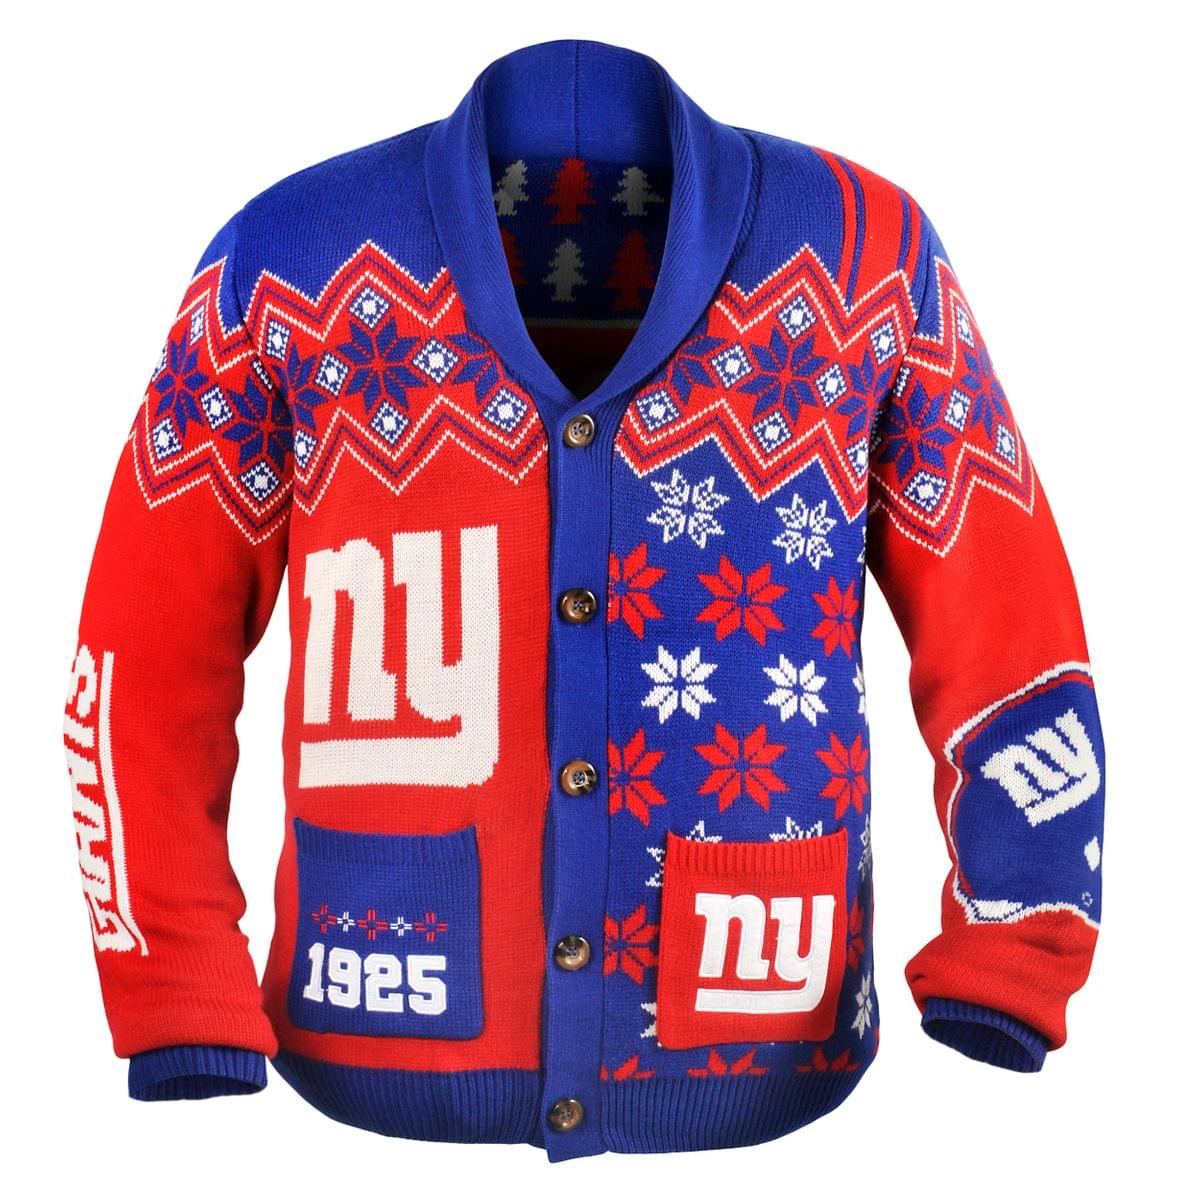 New York Giants NFL Adult Ugly Cardigan Sweater